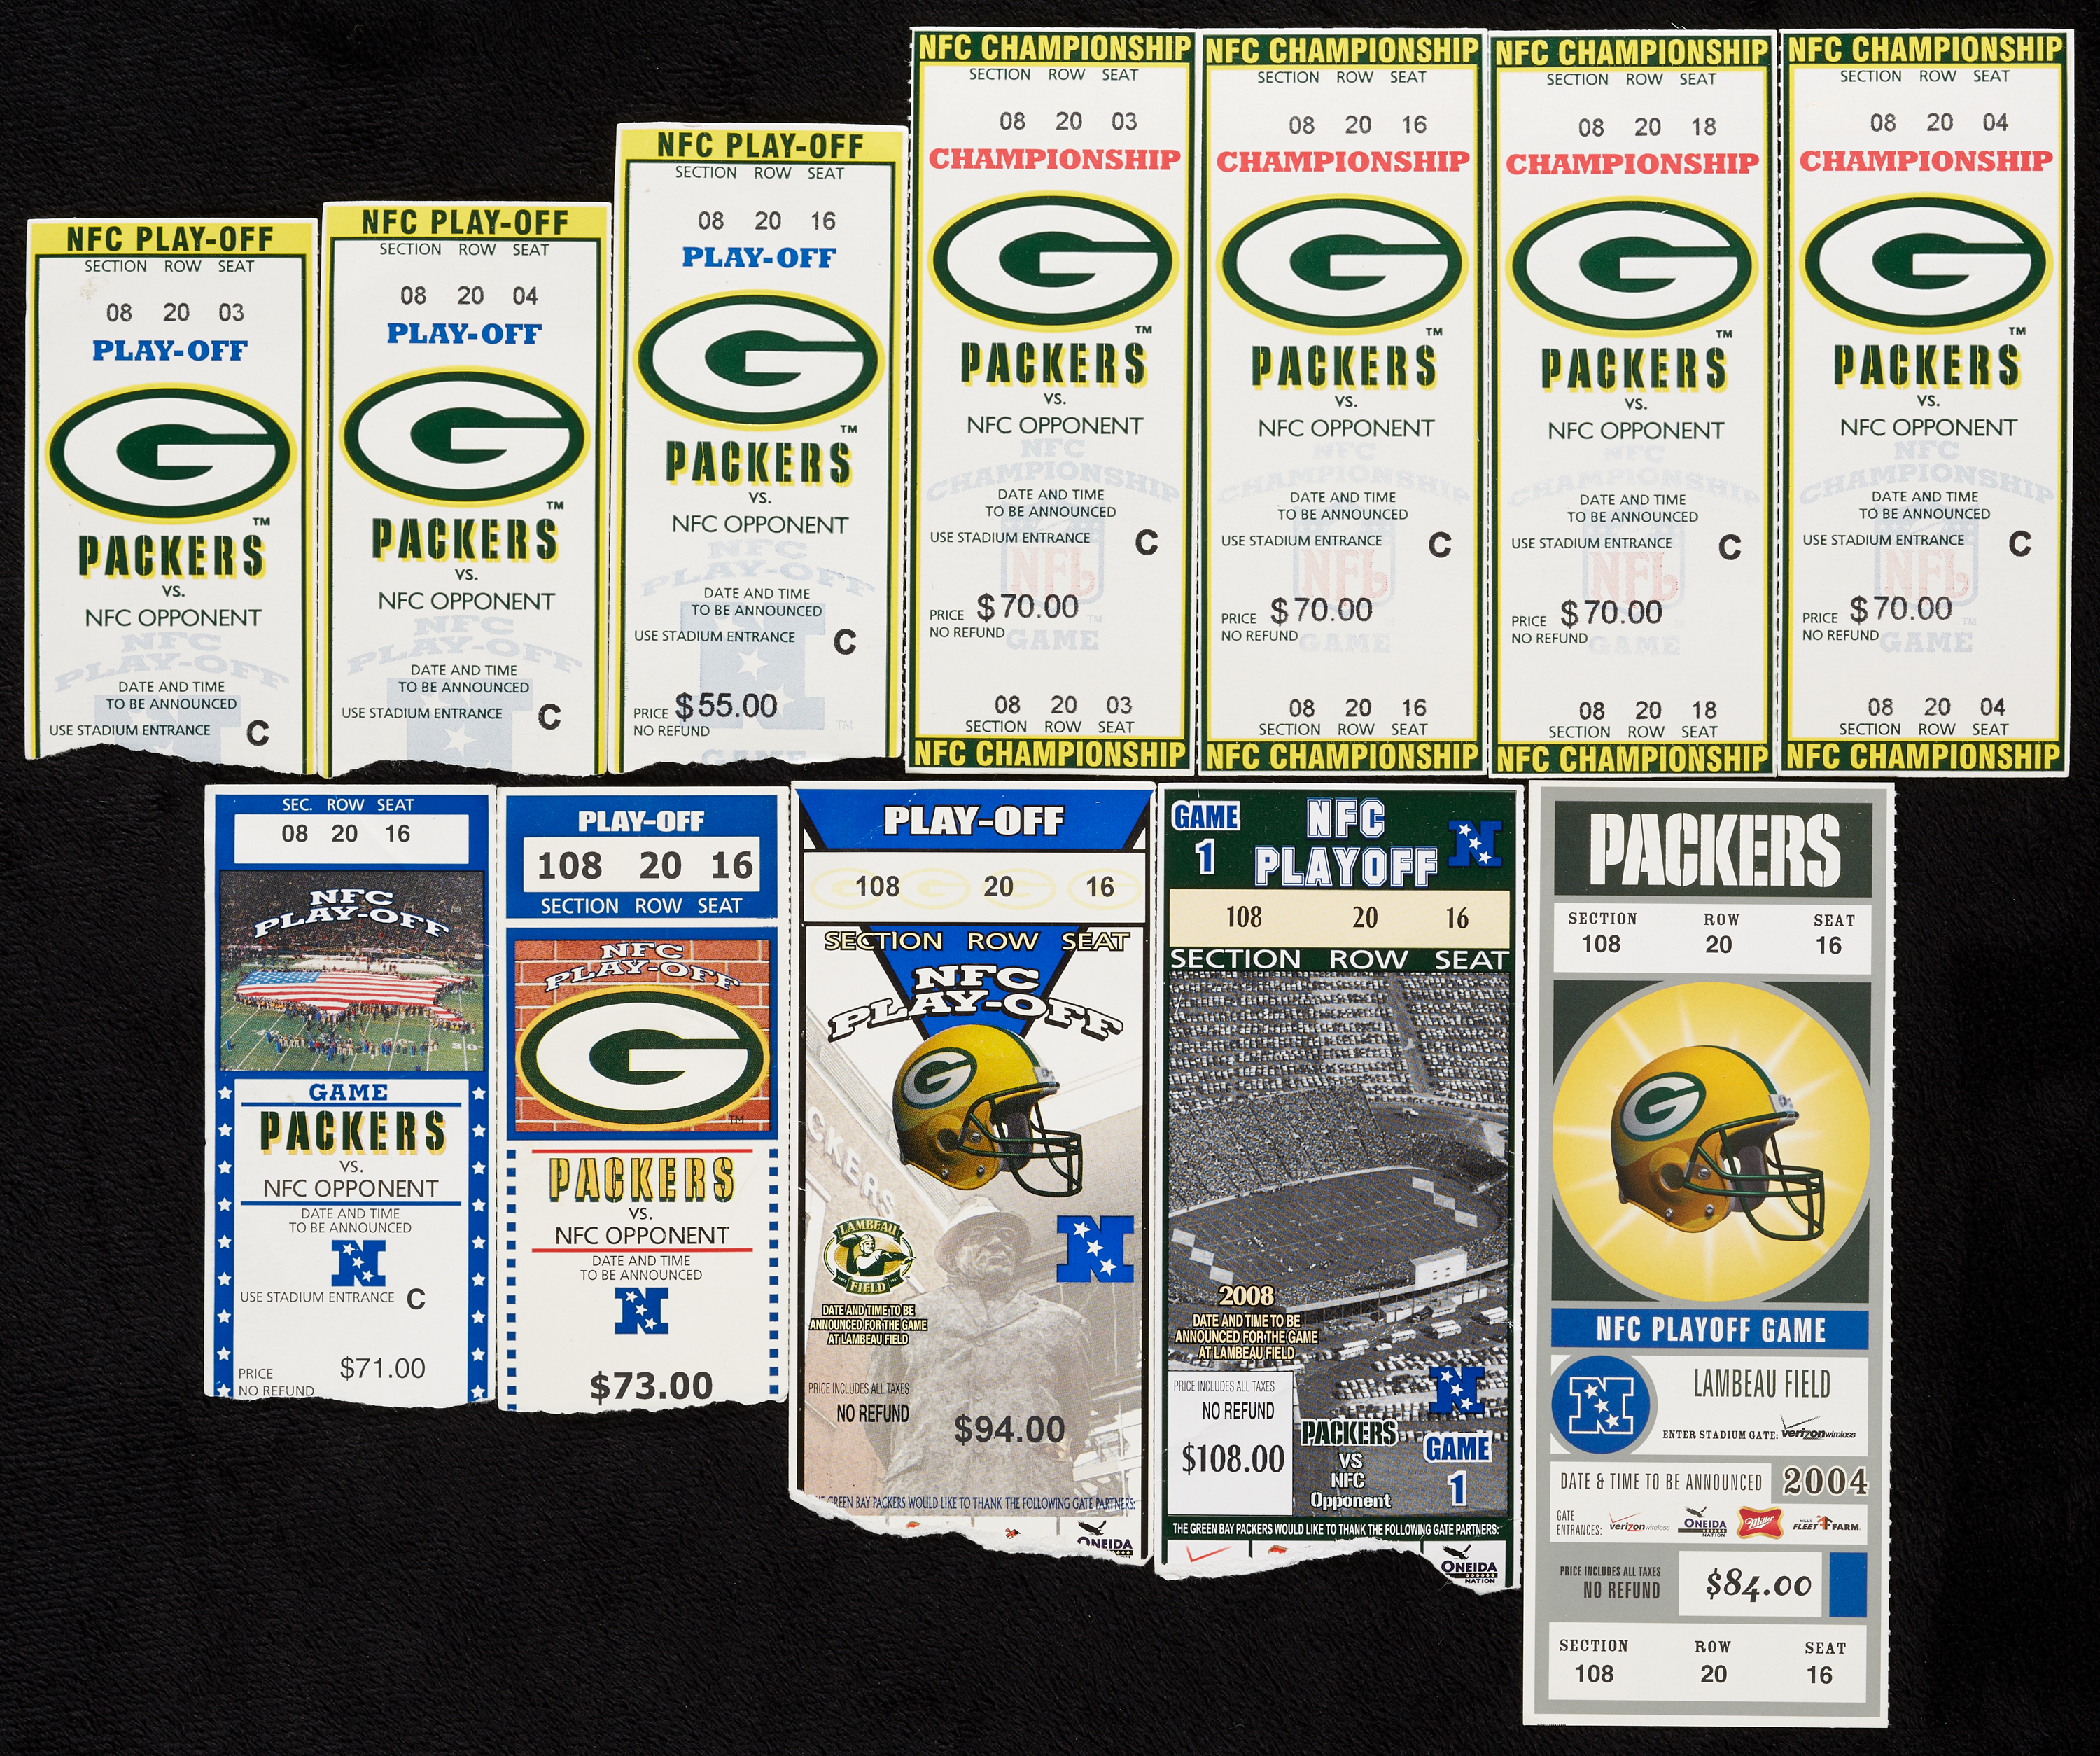 packer ticket prices by section